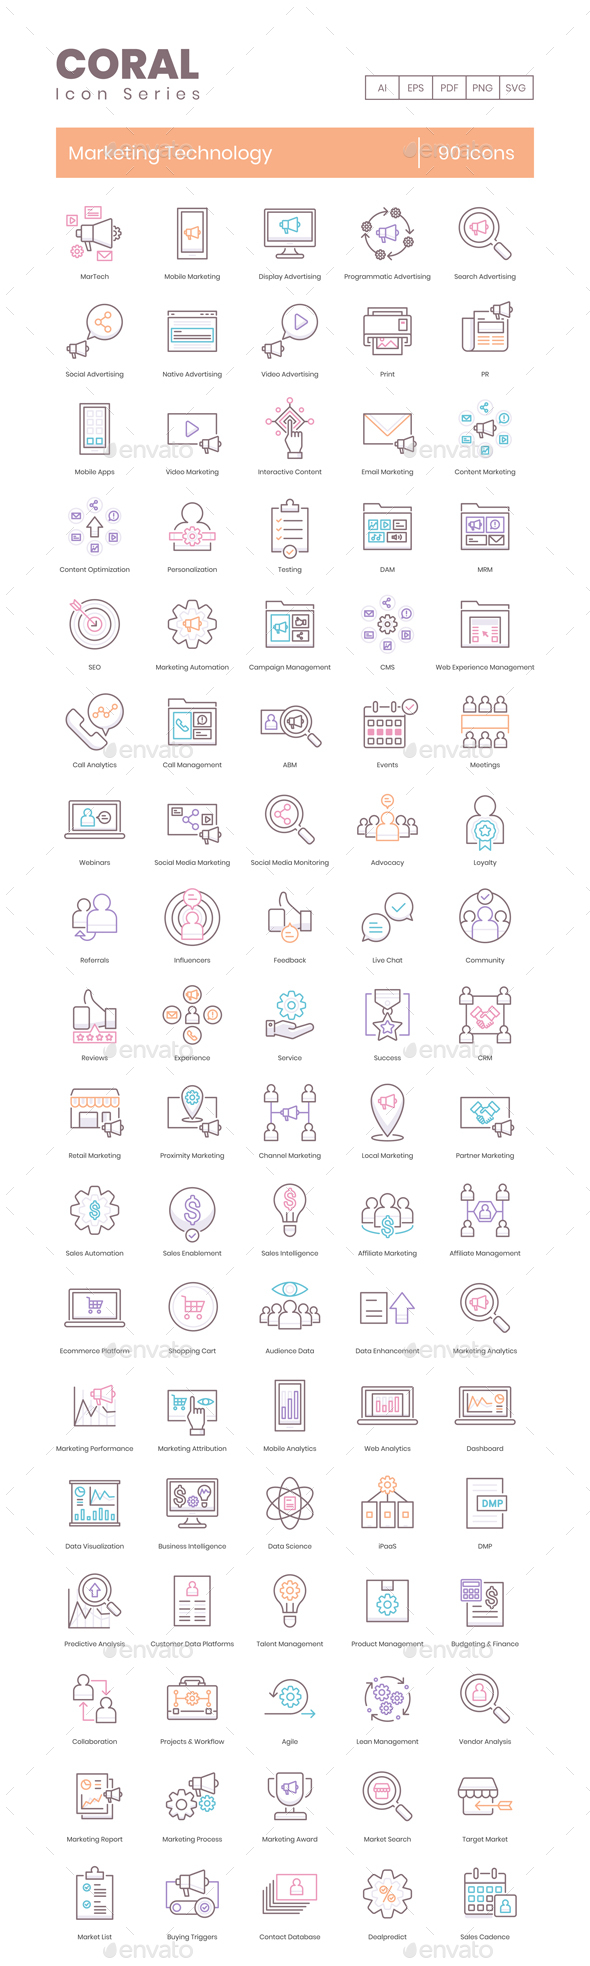 90 Marketing Technology Icons - Coral Series